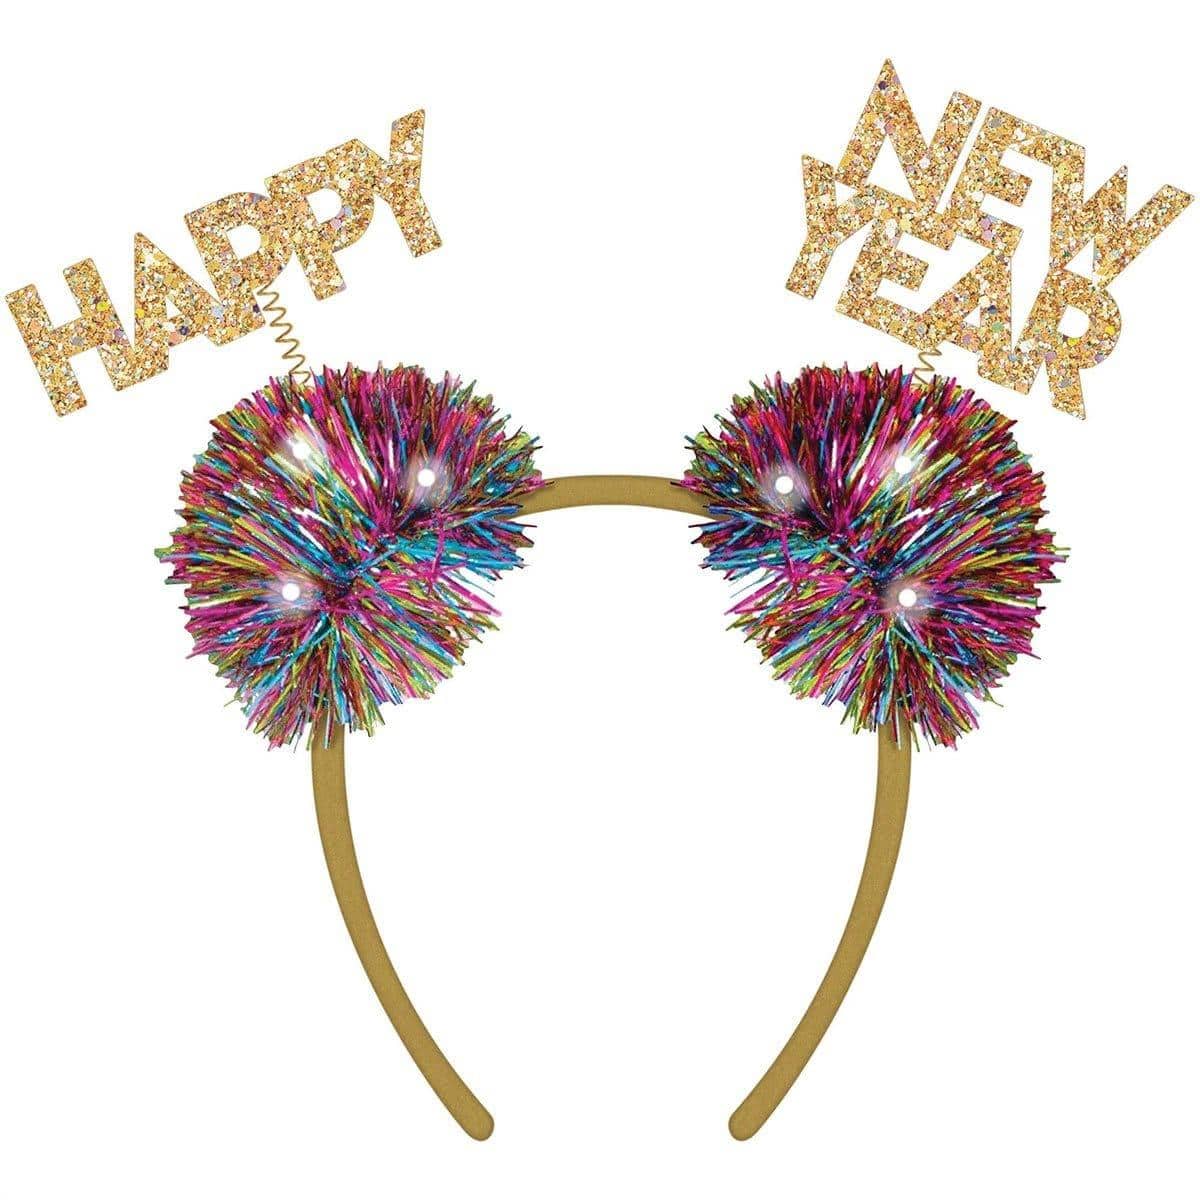 Buy New Year Light-Up Pom Pom Headband - Colorful Confetti sold at Party Expert